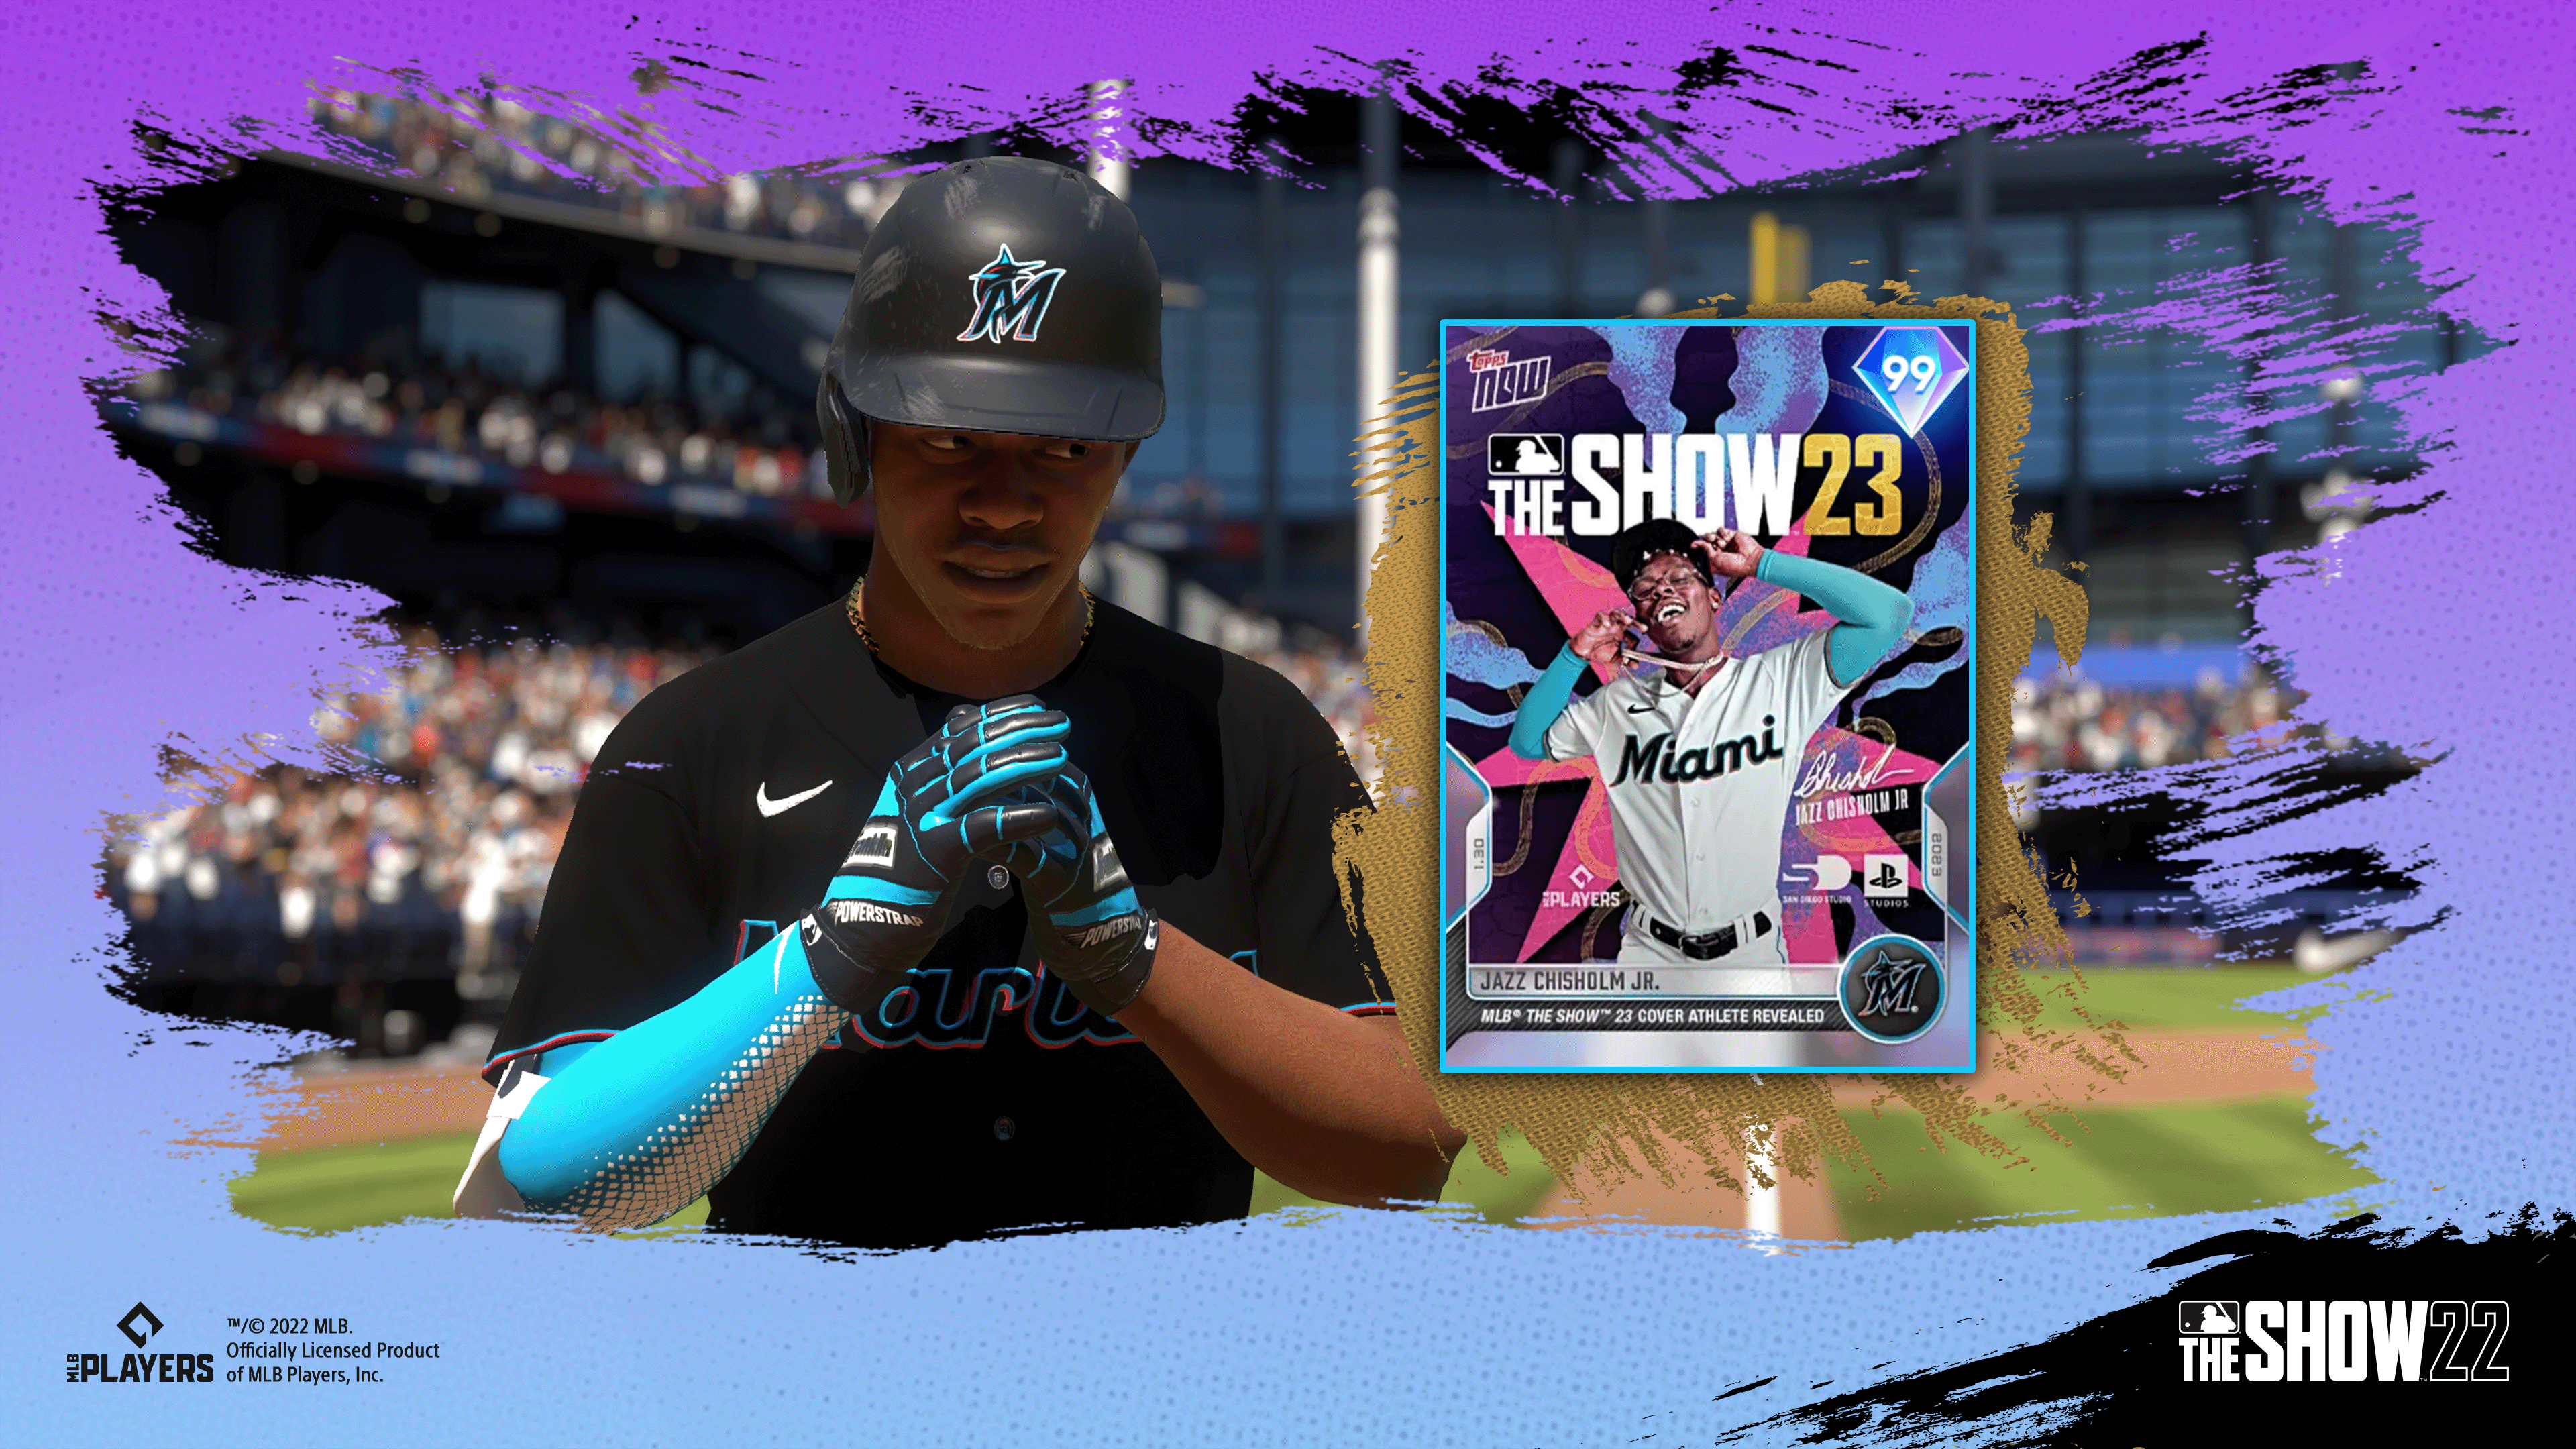 MLB The Show on X: Celebrate alongside @j_chisholm3 with this